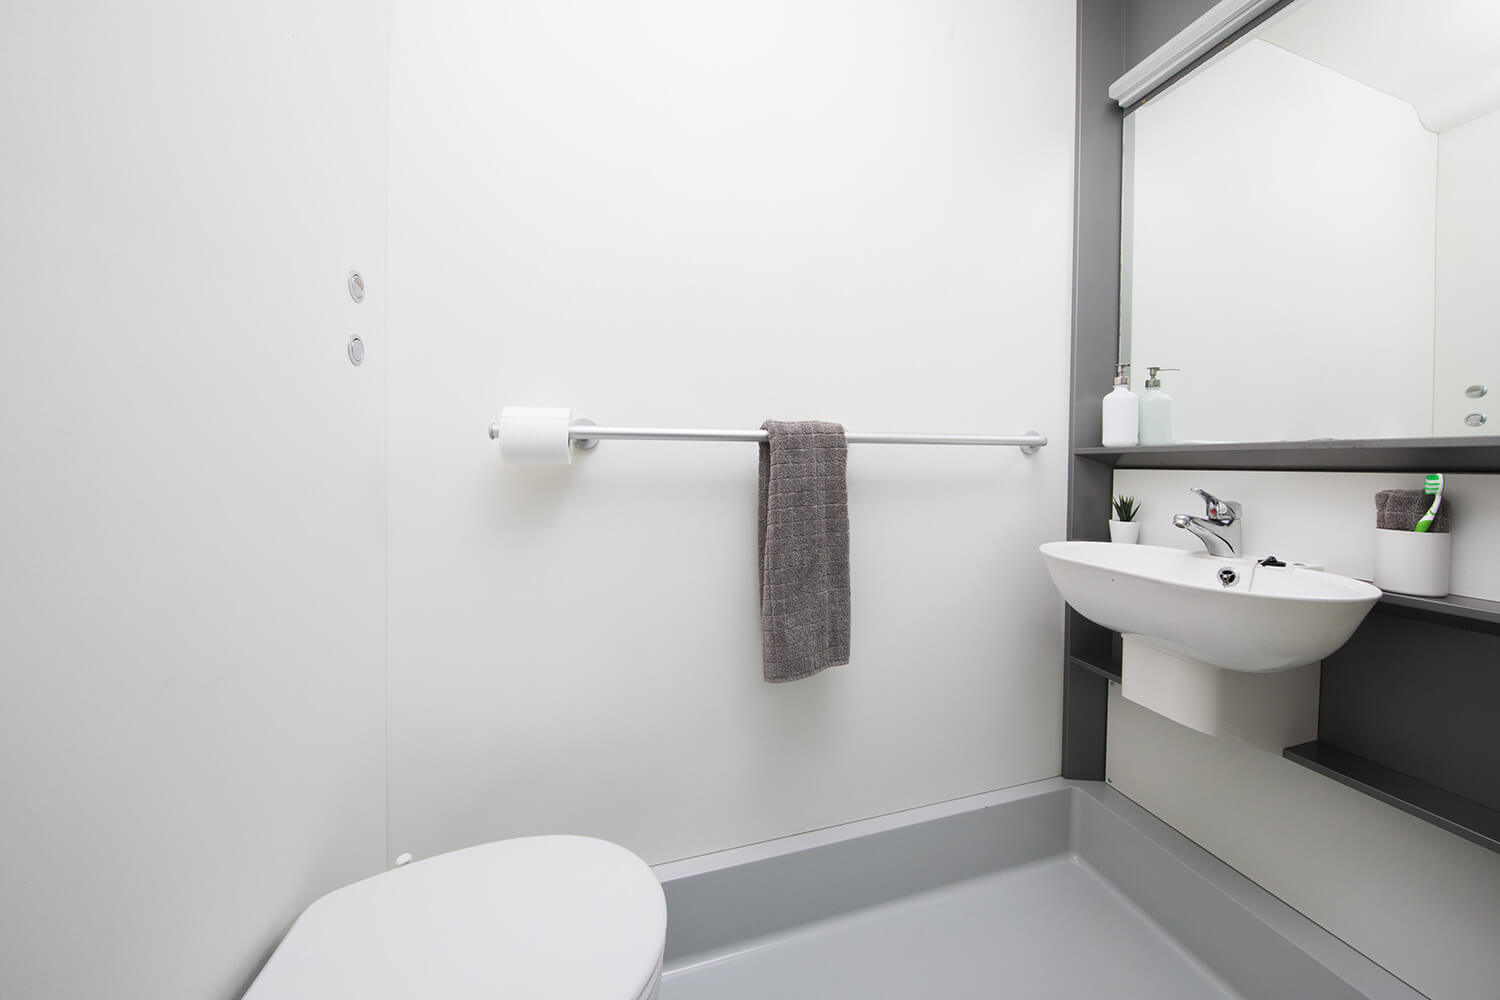 Student accommodation London bathroom sink and toliet at Pacific Court